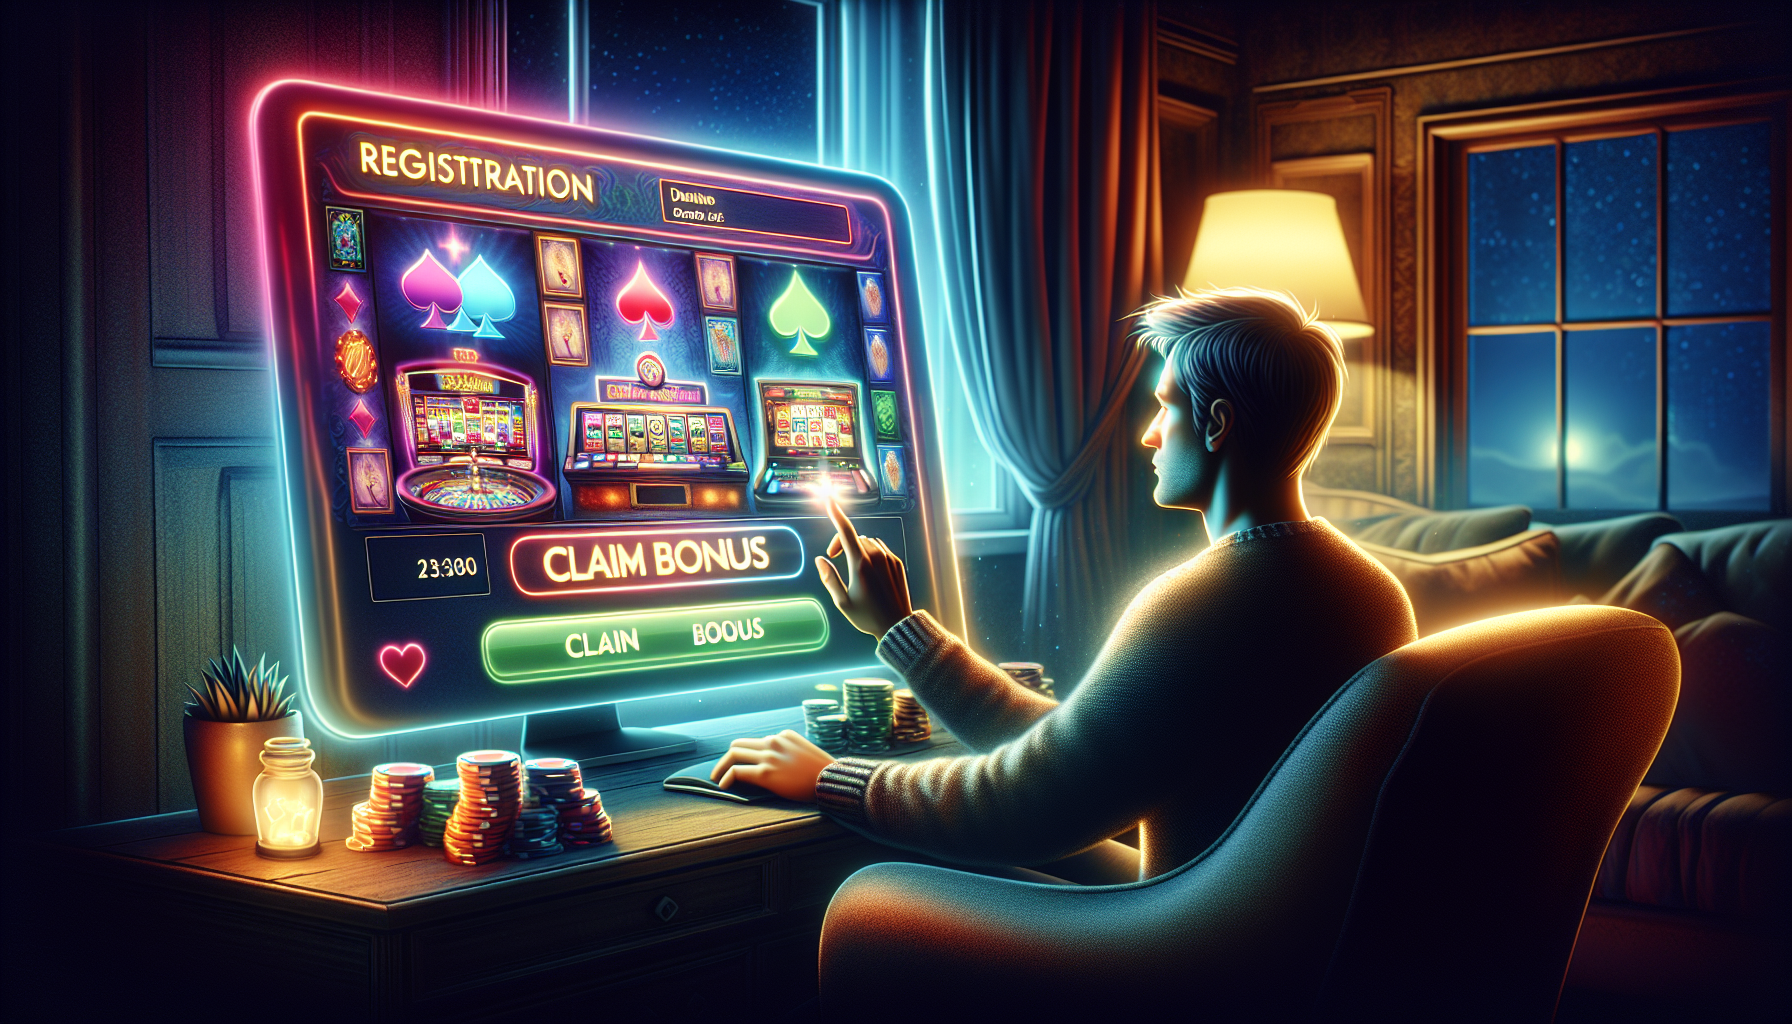 Illustration of a person registering for an online casino account